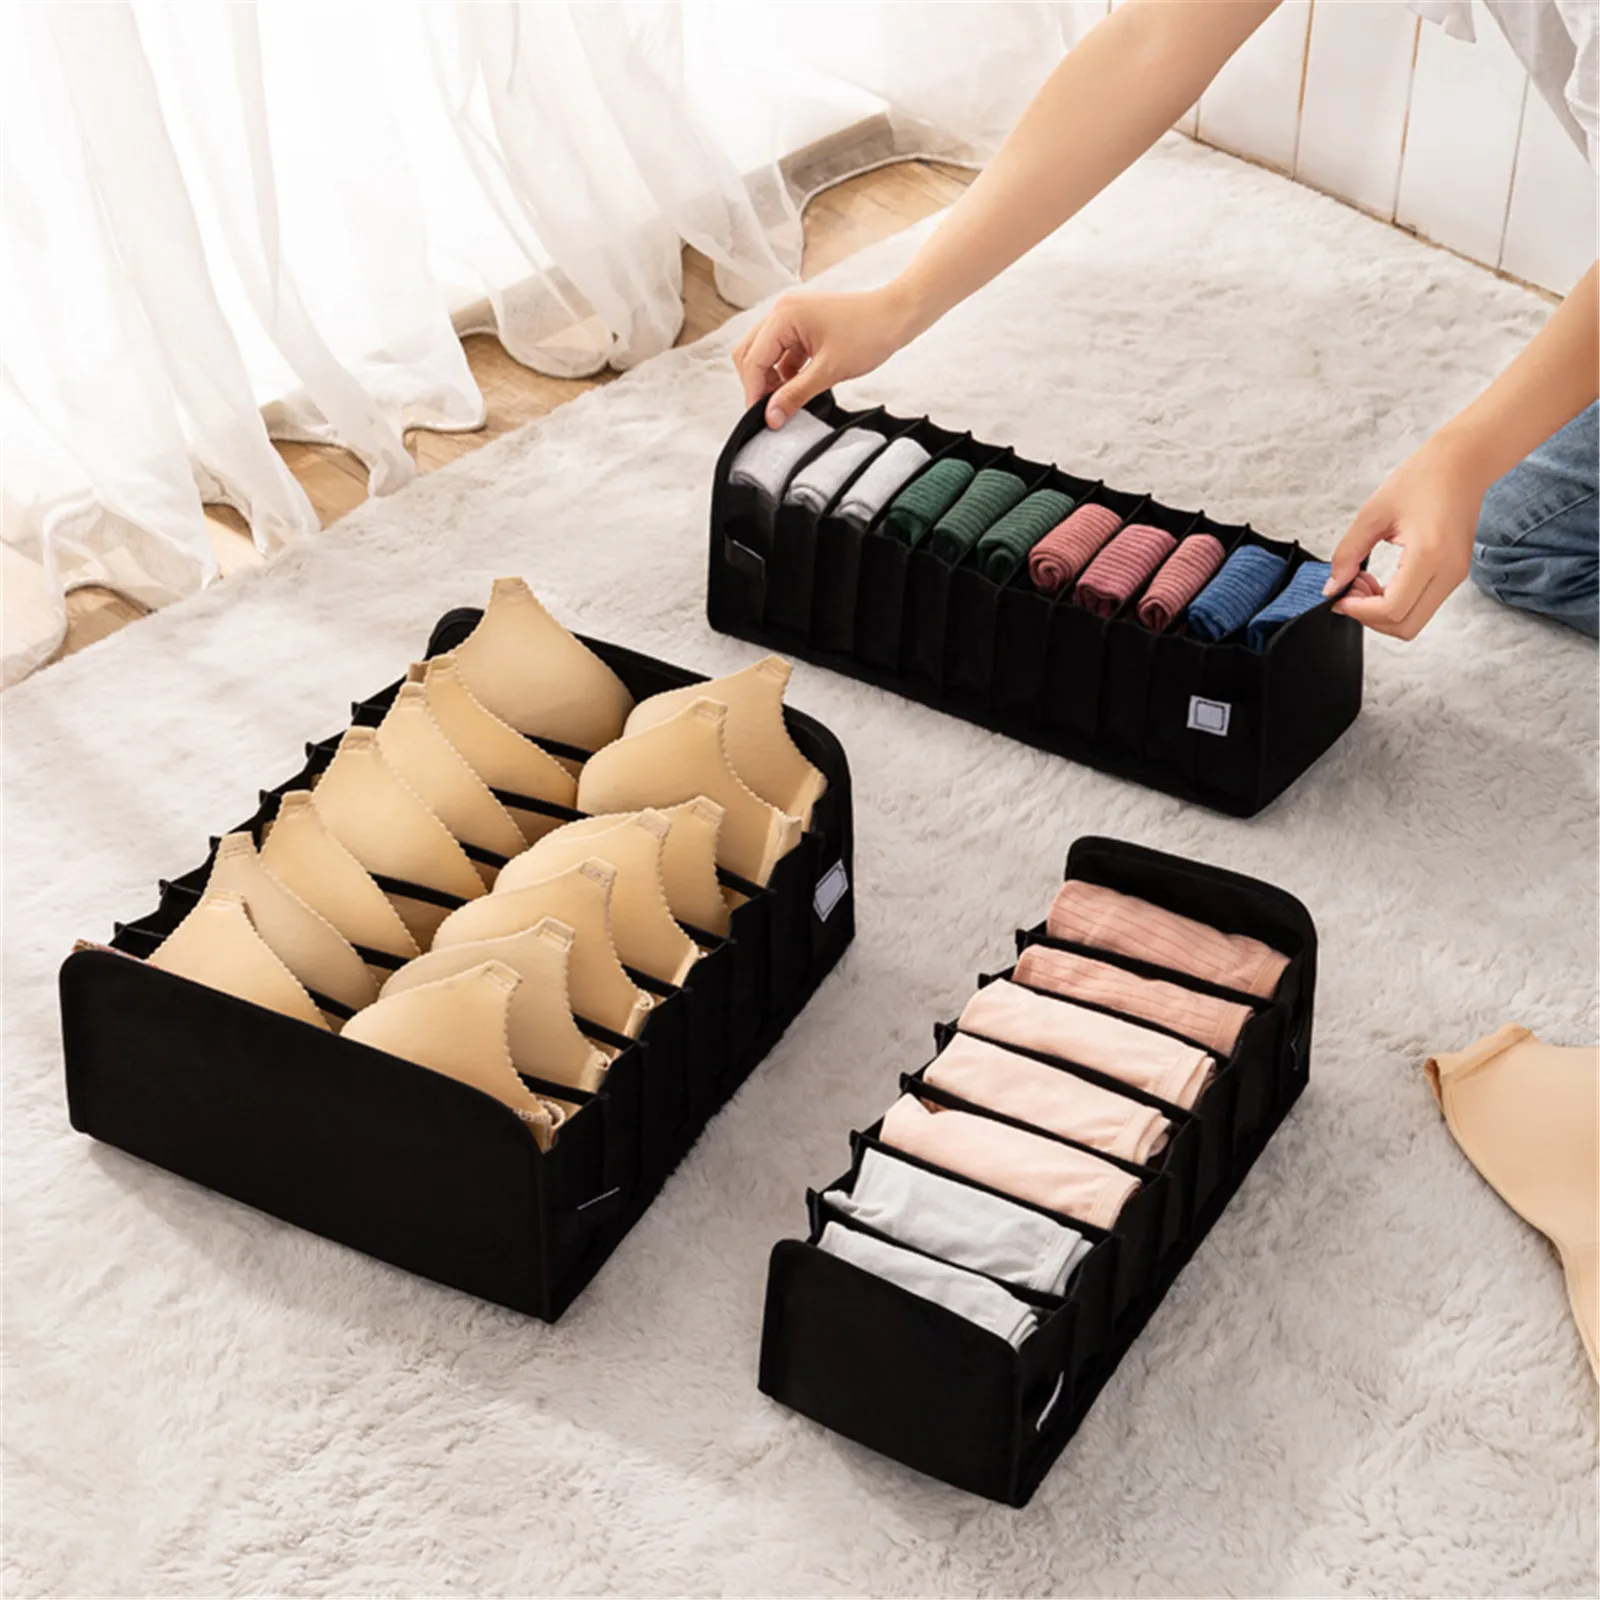 

Collapsible Compression Underwear Storage Box Folding Closet Organizer Bra Sock Panty For Dormitory Bedroom Drawer Divider